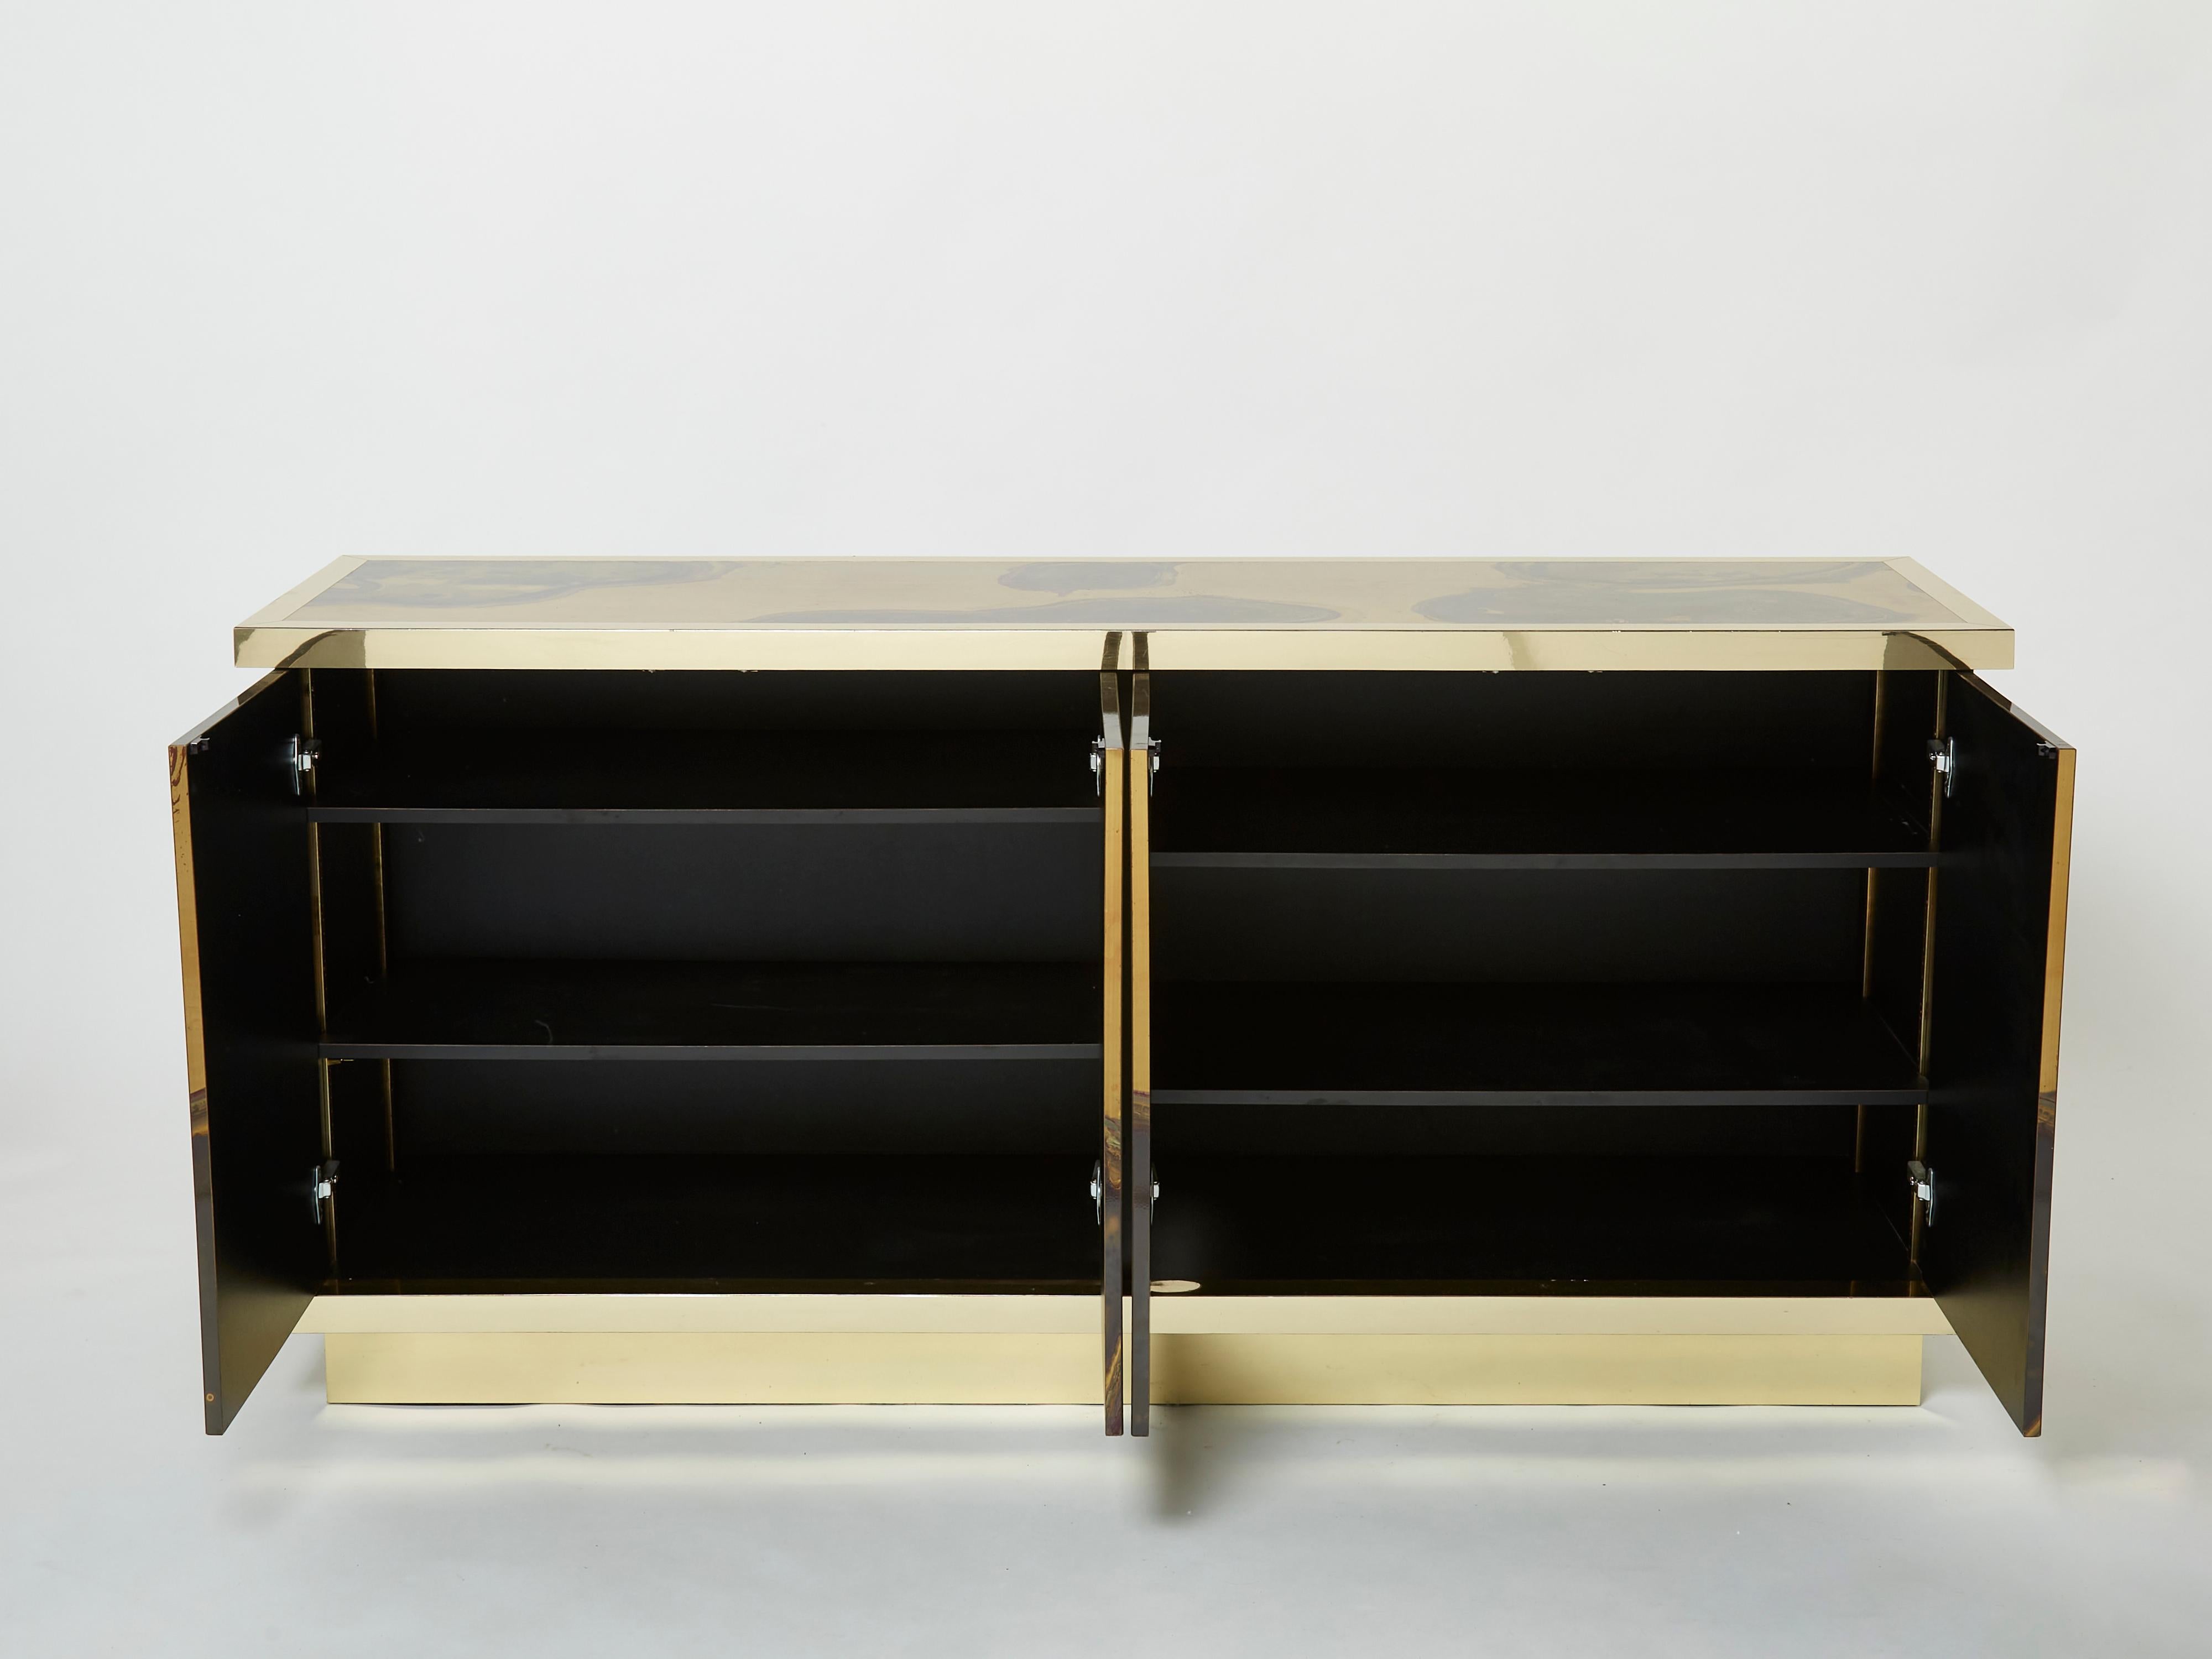 French Isabelle and Richard Faure Oxidized Brass Sideboard 1970s For Sale 2